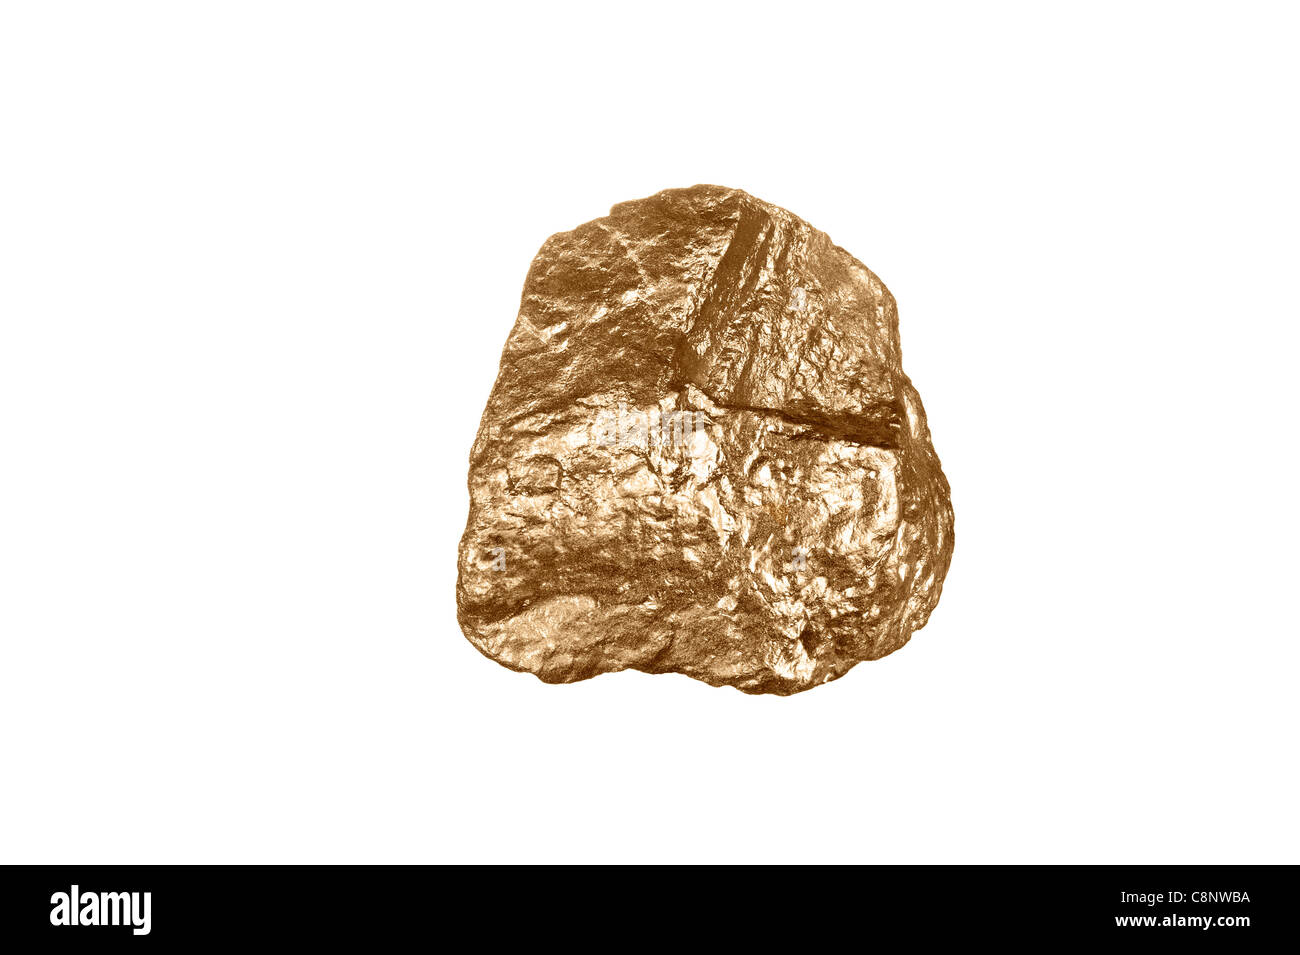 A gold nugget isolated on a white background Stock Photo